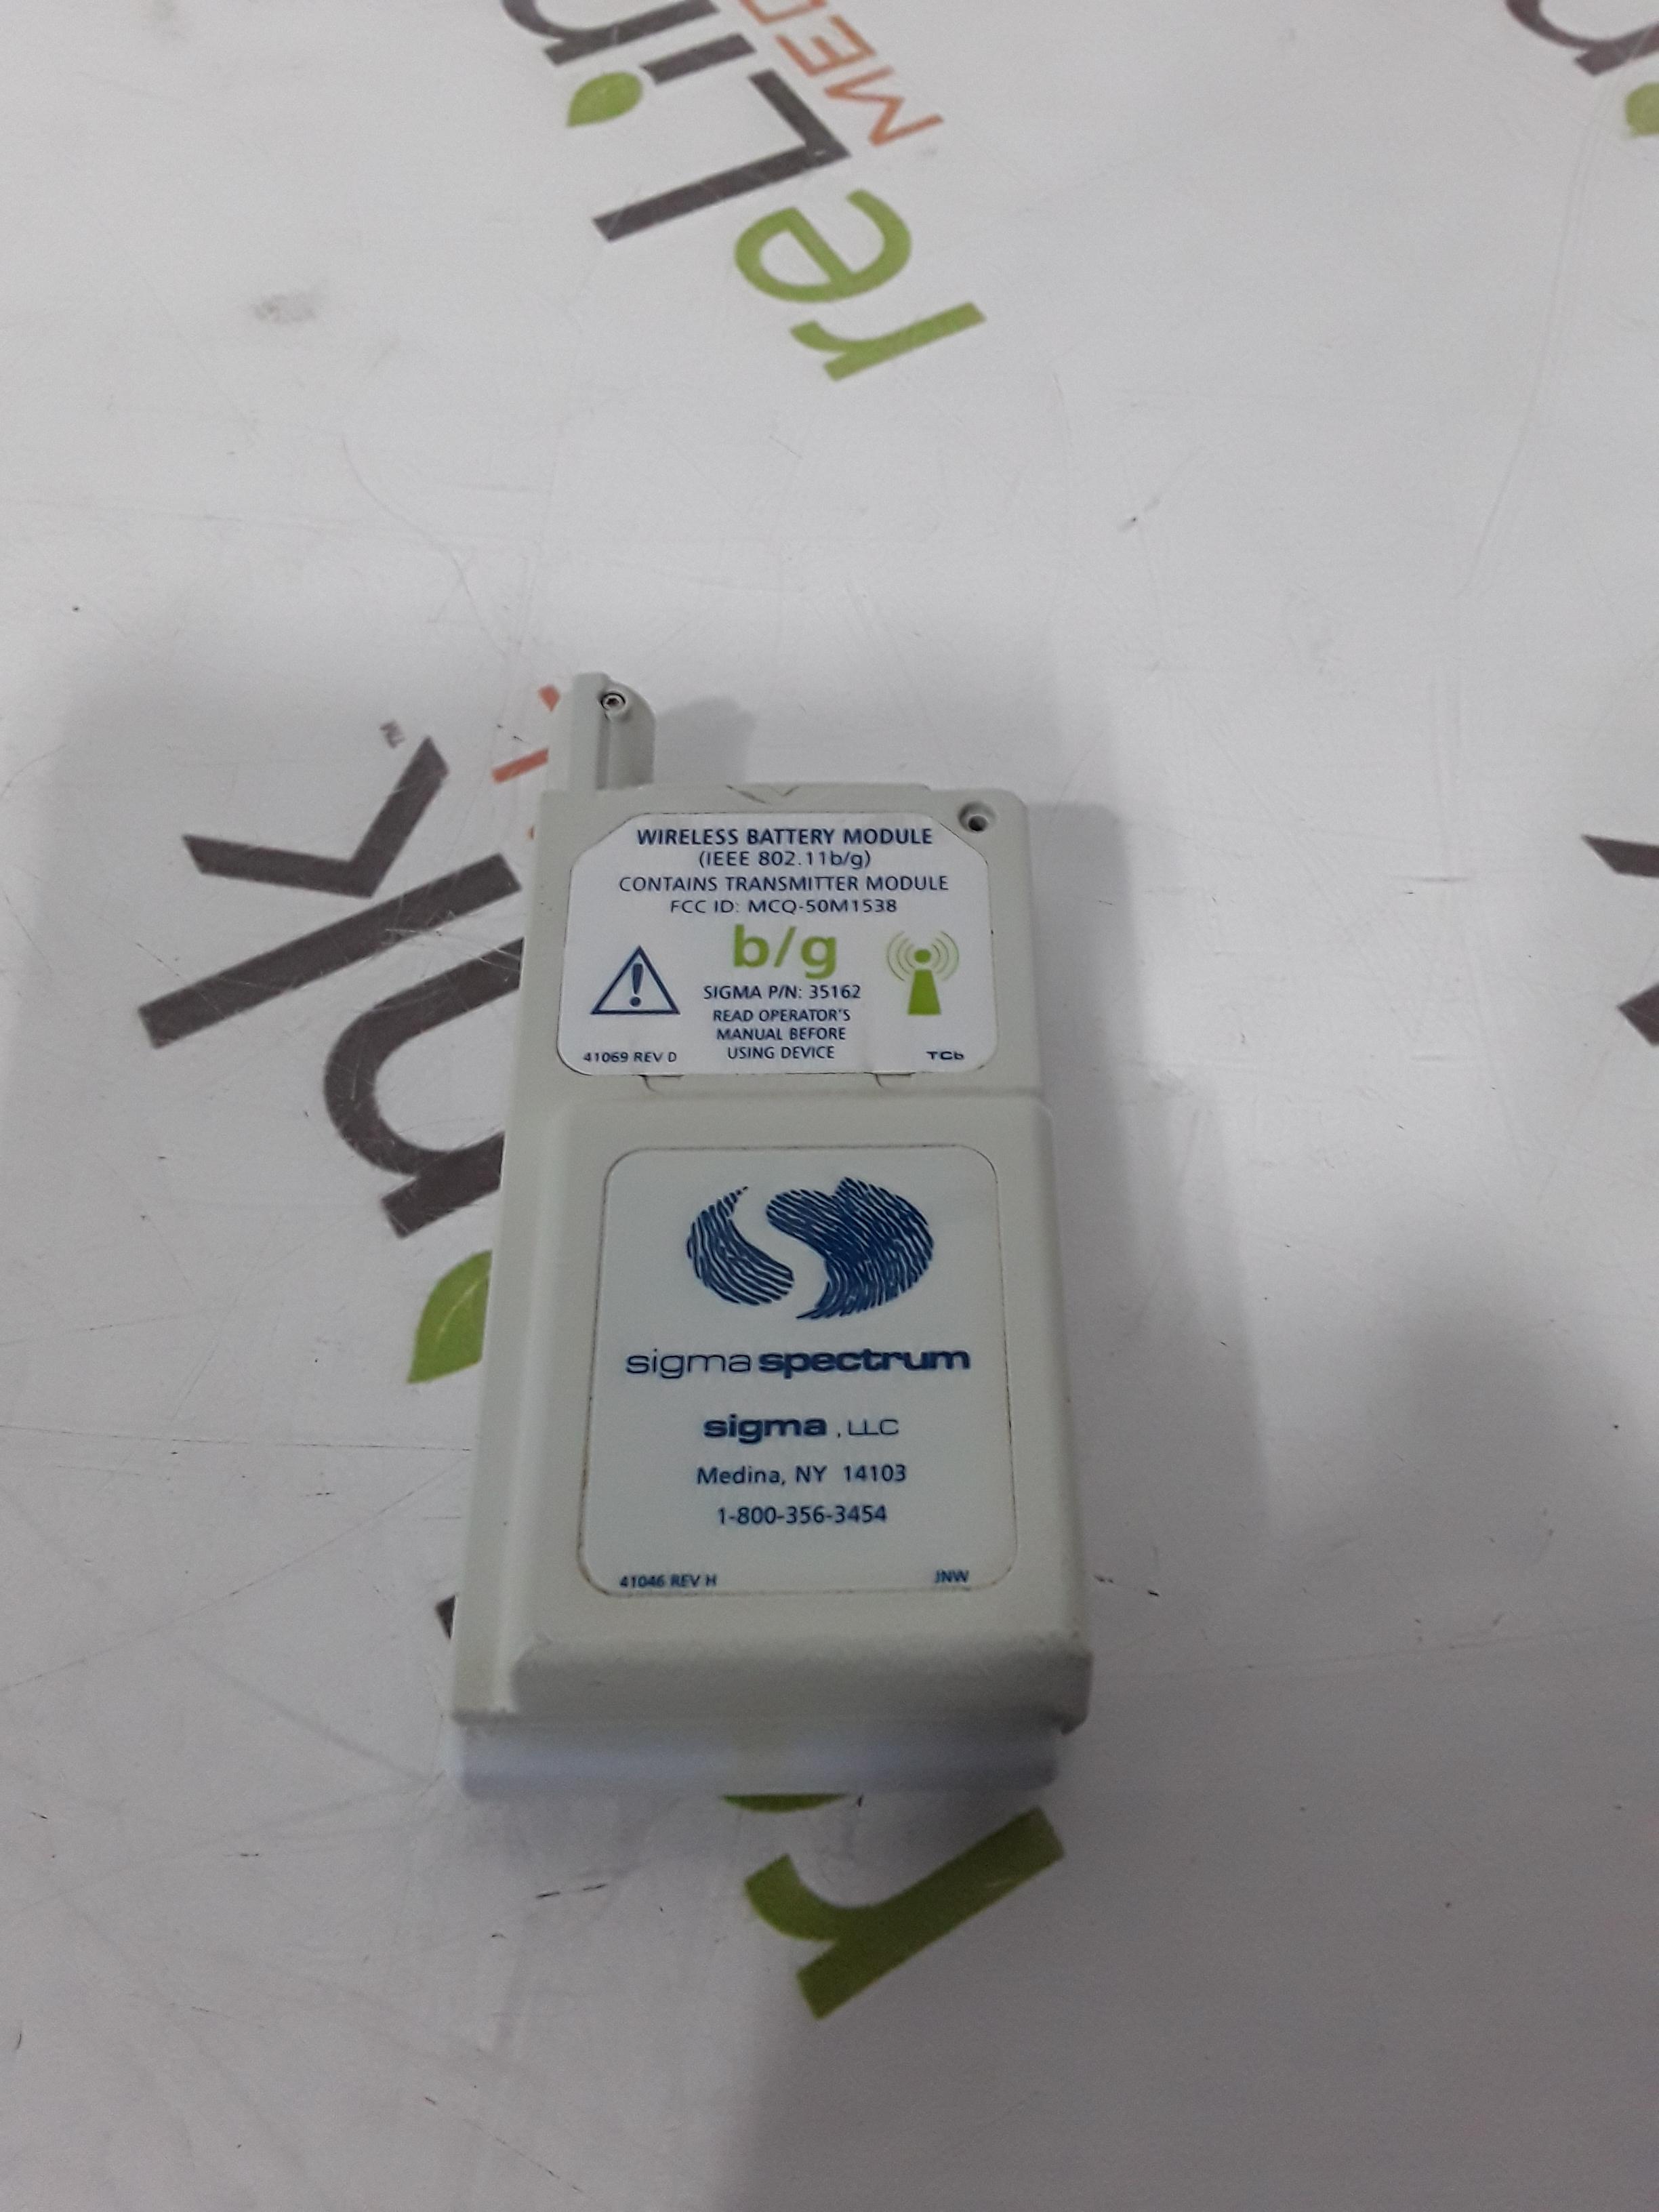 Baxter Sigma Spectrum 6.05.14 with B/G Battery Infusion Pump - 352693